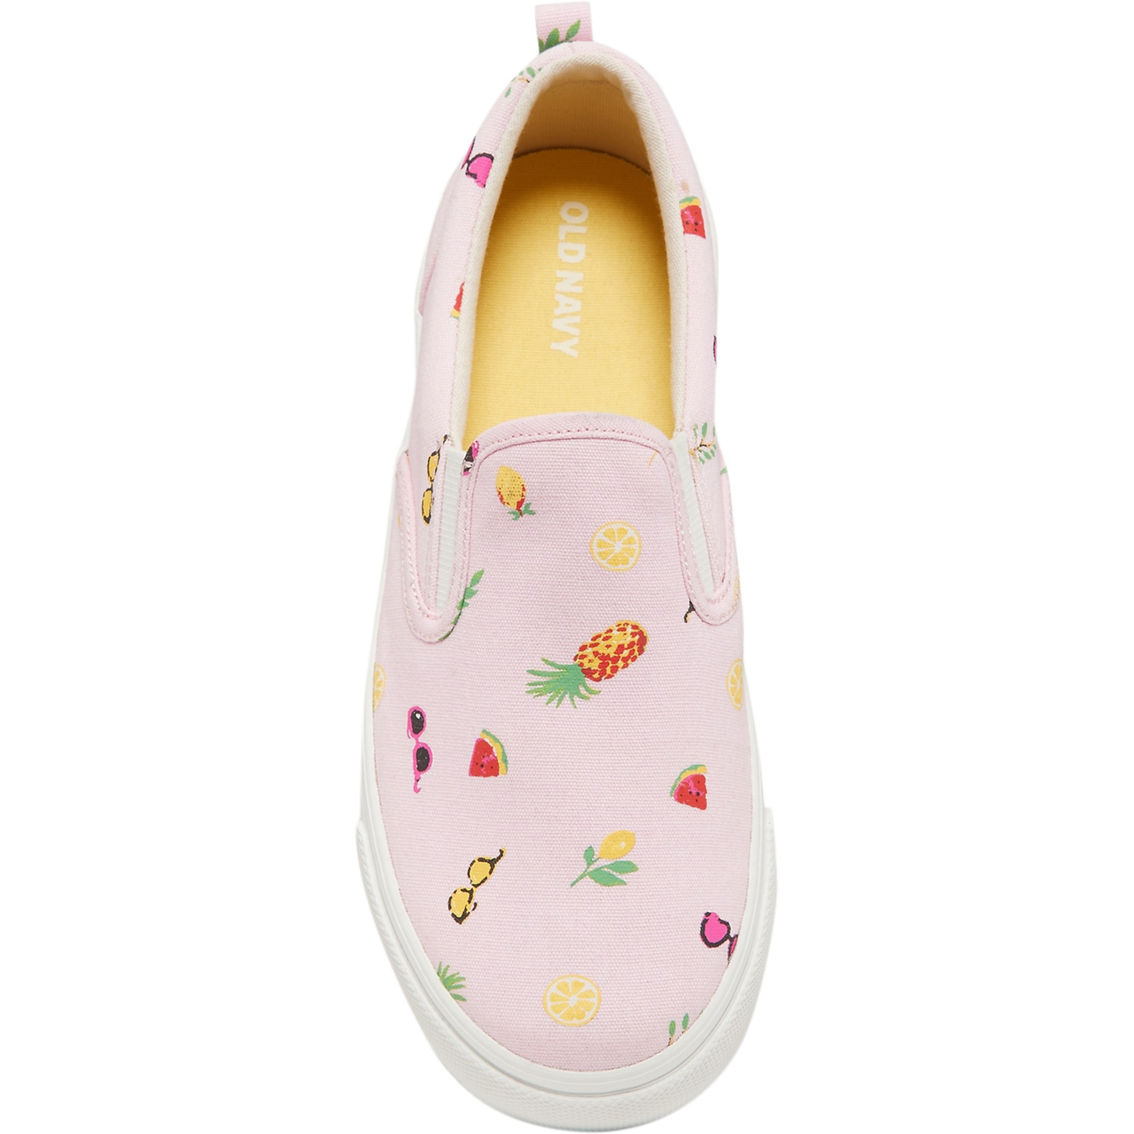 Old Navy Girls Canvas Slip-On Sneakers - Image 3 of 3